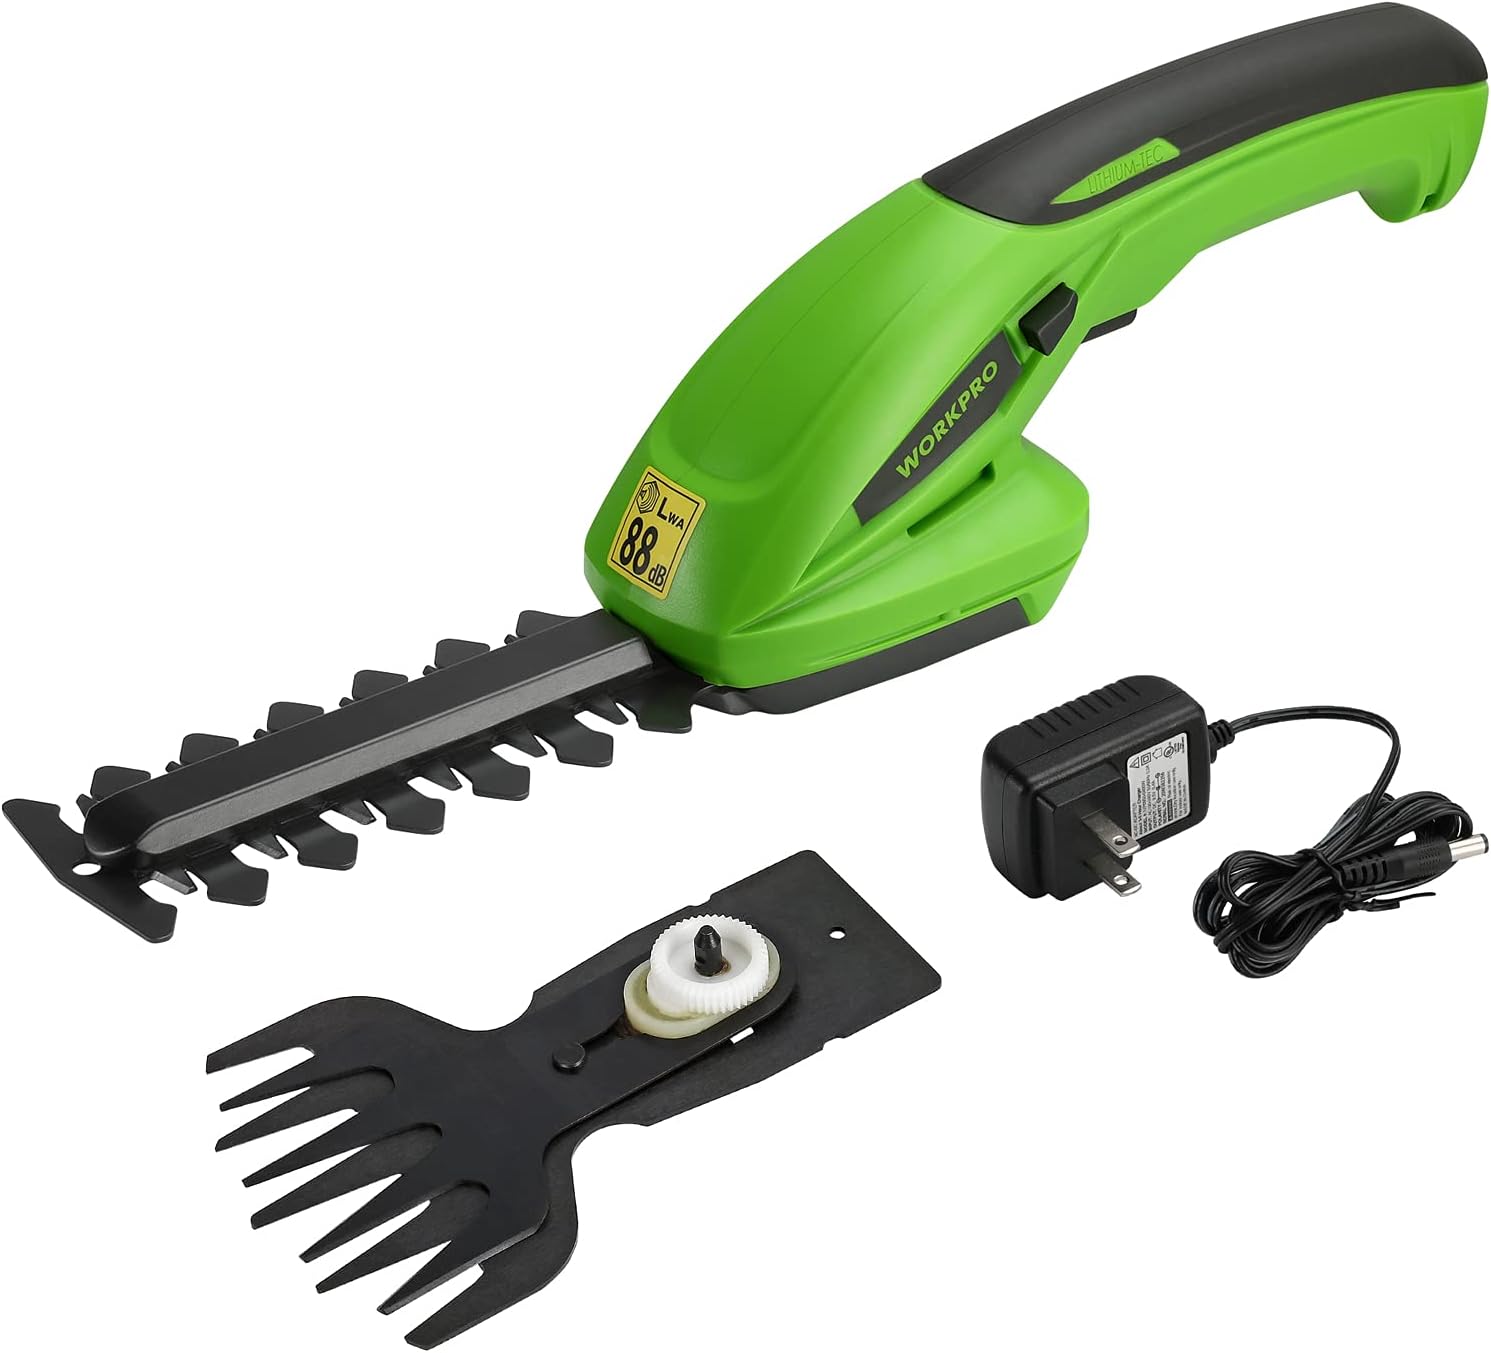 WORKPRO Cordless Grass Shear & Shrubbery Trimmer - 2 [...]